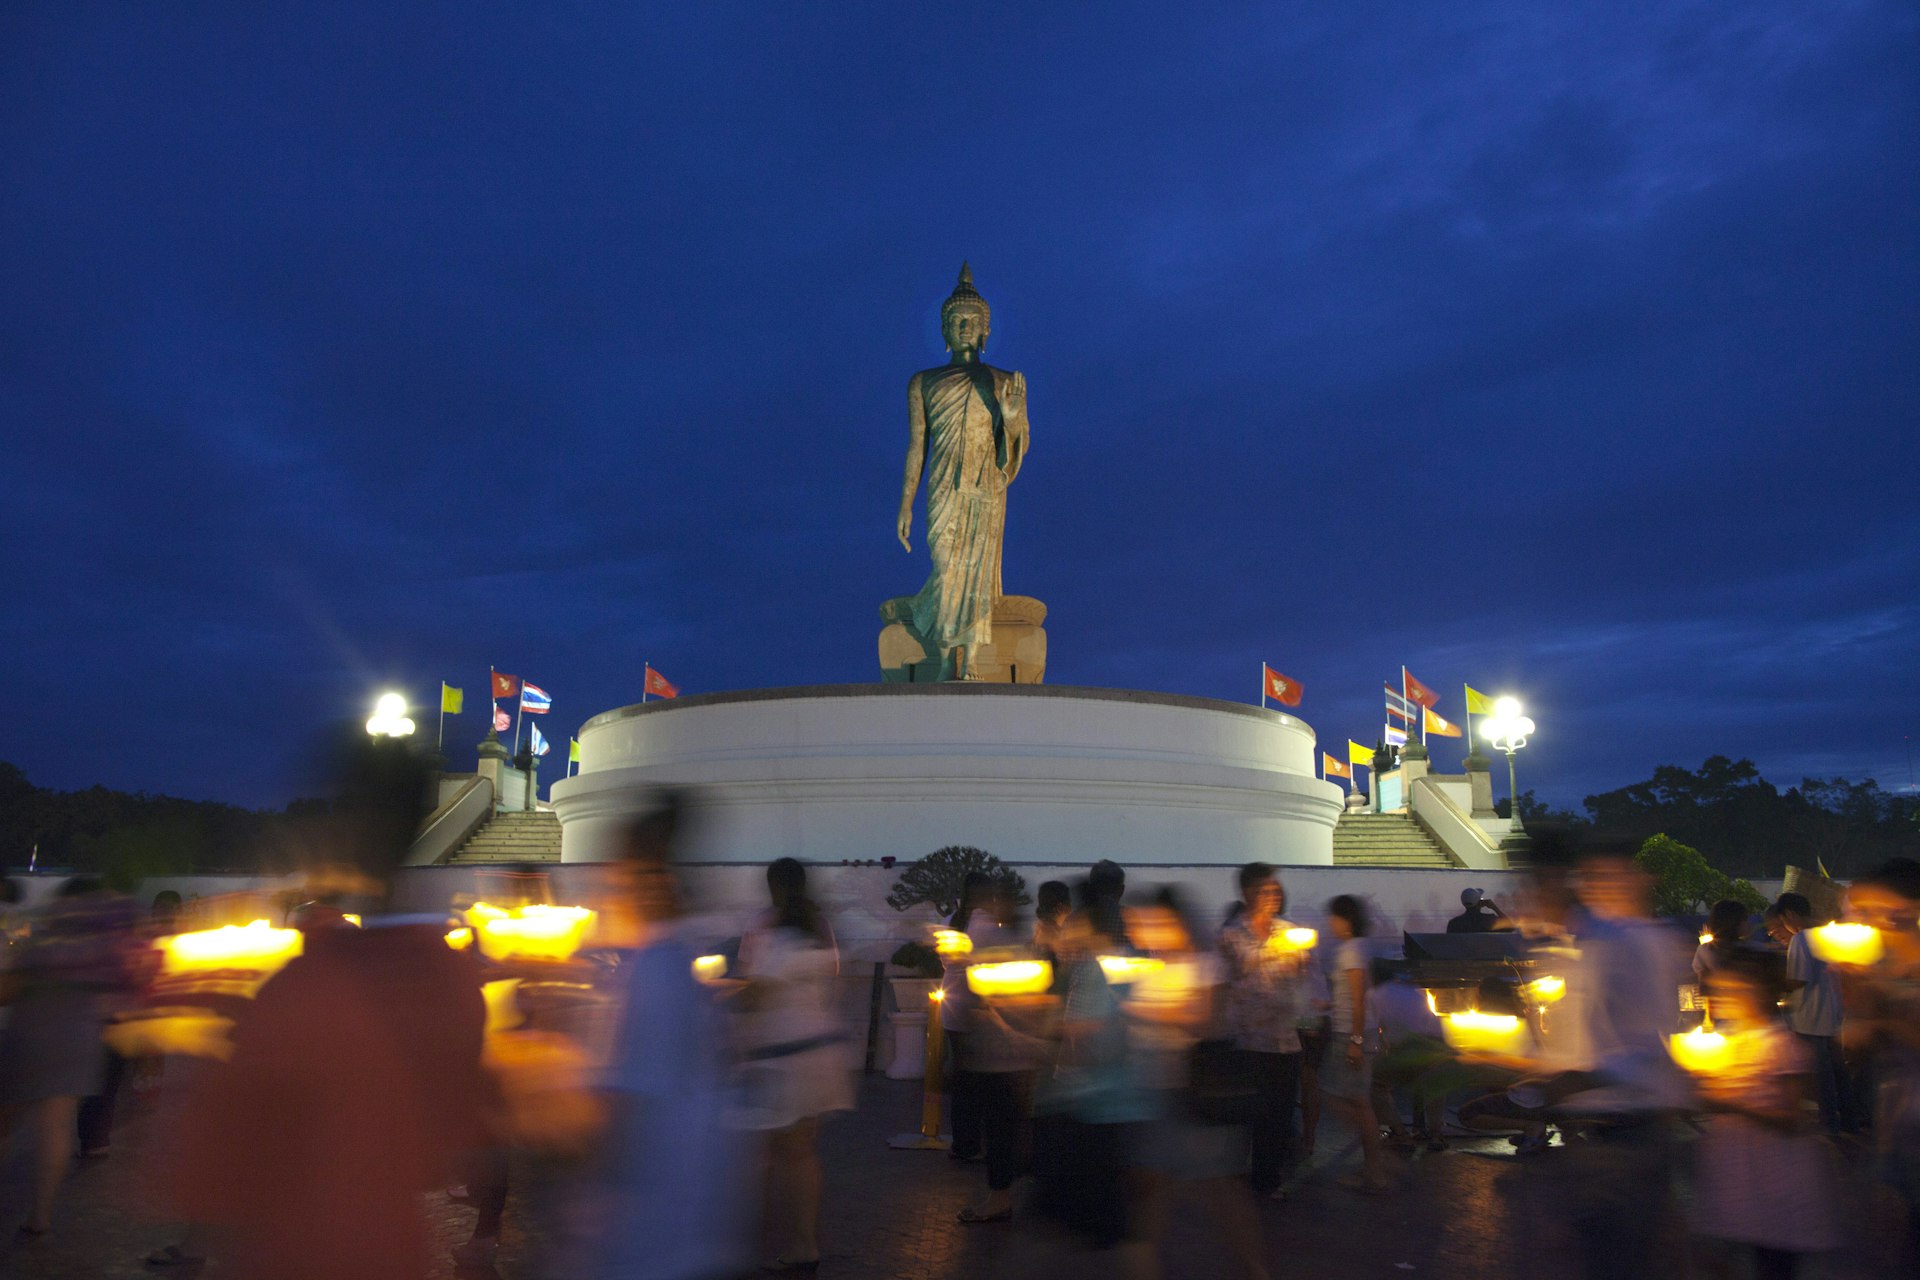 Thai's celebrate the beginning of Buddhist Lent  with a candle ceremony July 15, 2011 at the Phutthamonthon temple in Nakhon Pathom Province west of Bangkok, Thailand. Buddhists walk clockwise around the highest free-standing statue of Buddha in the world.